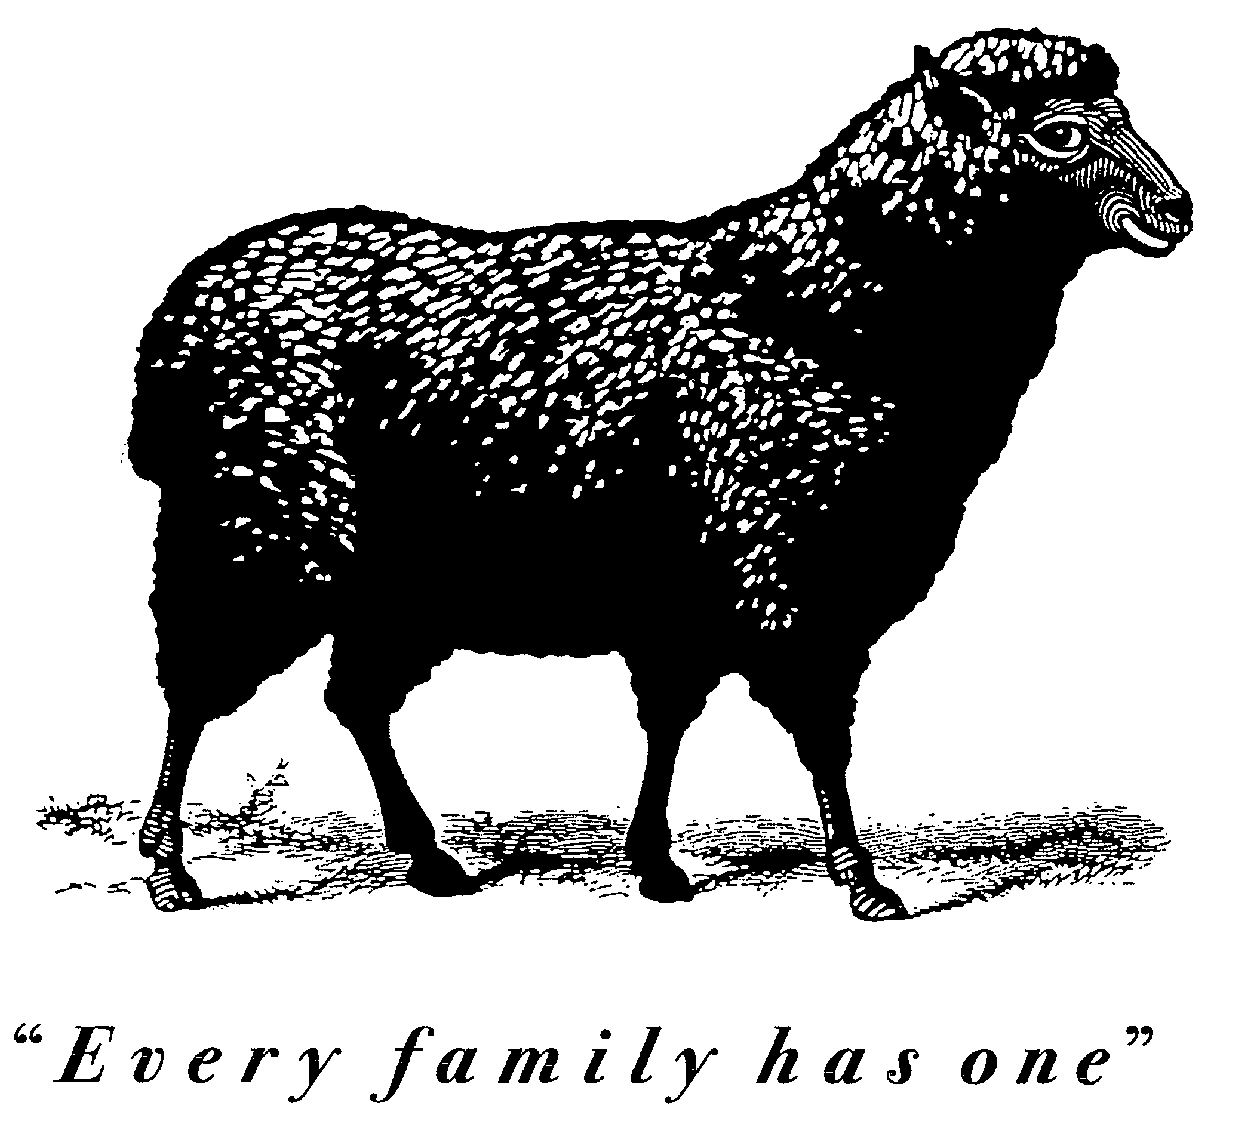  "EVERY FAMILY HAS ONE"